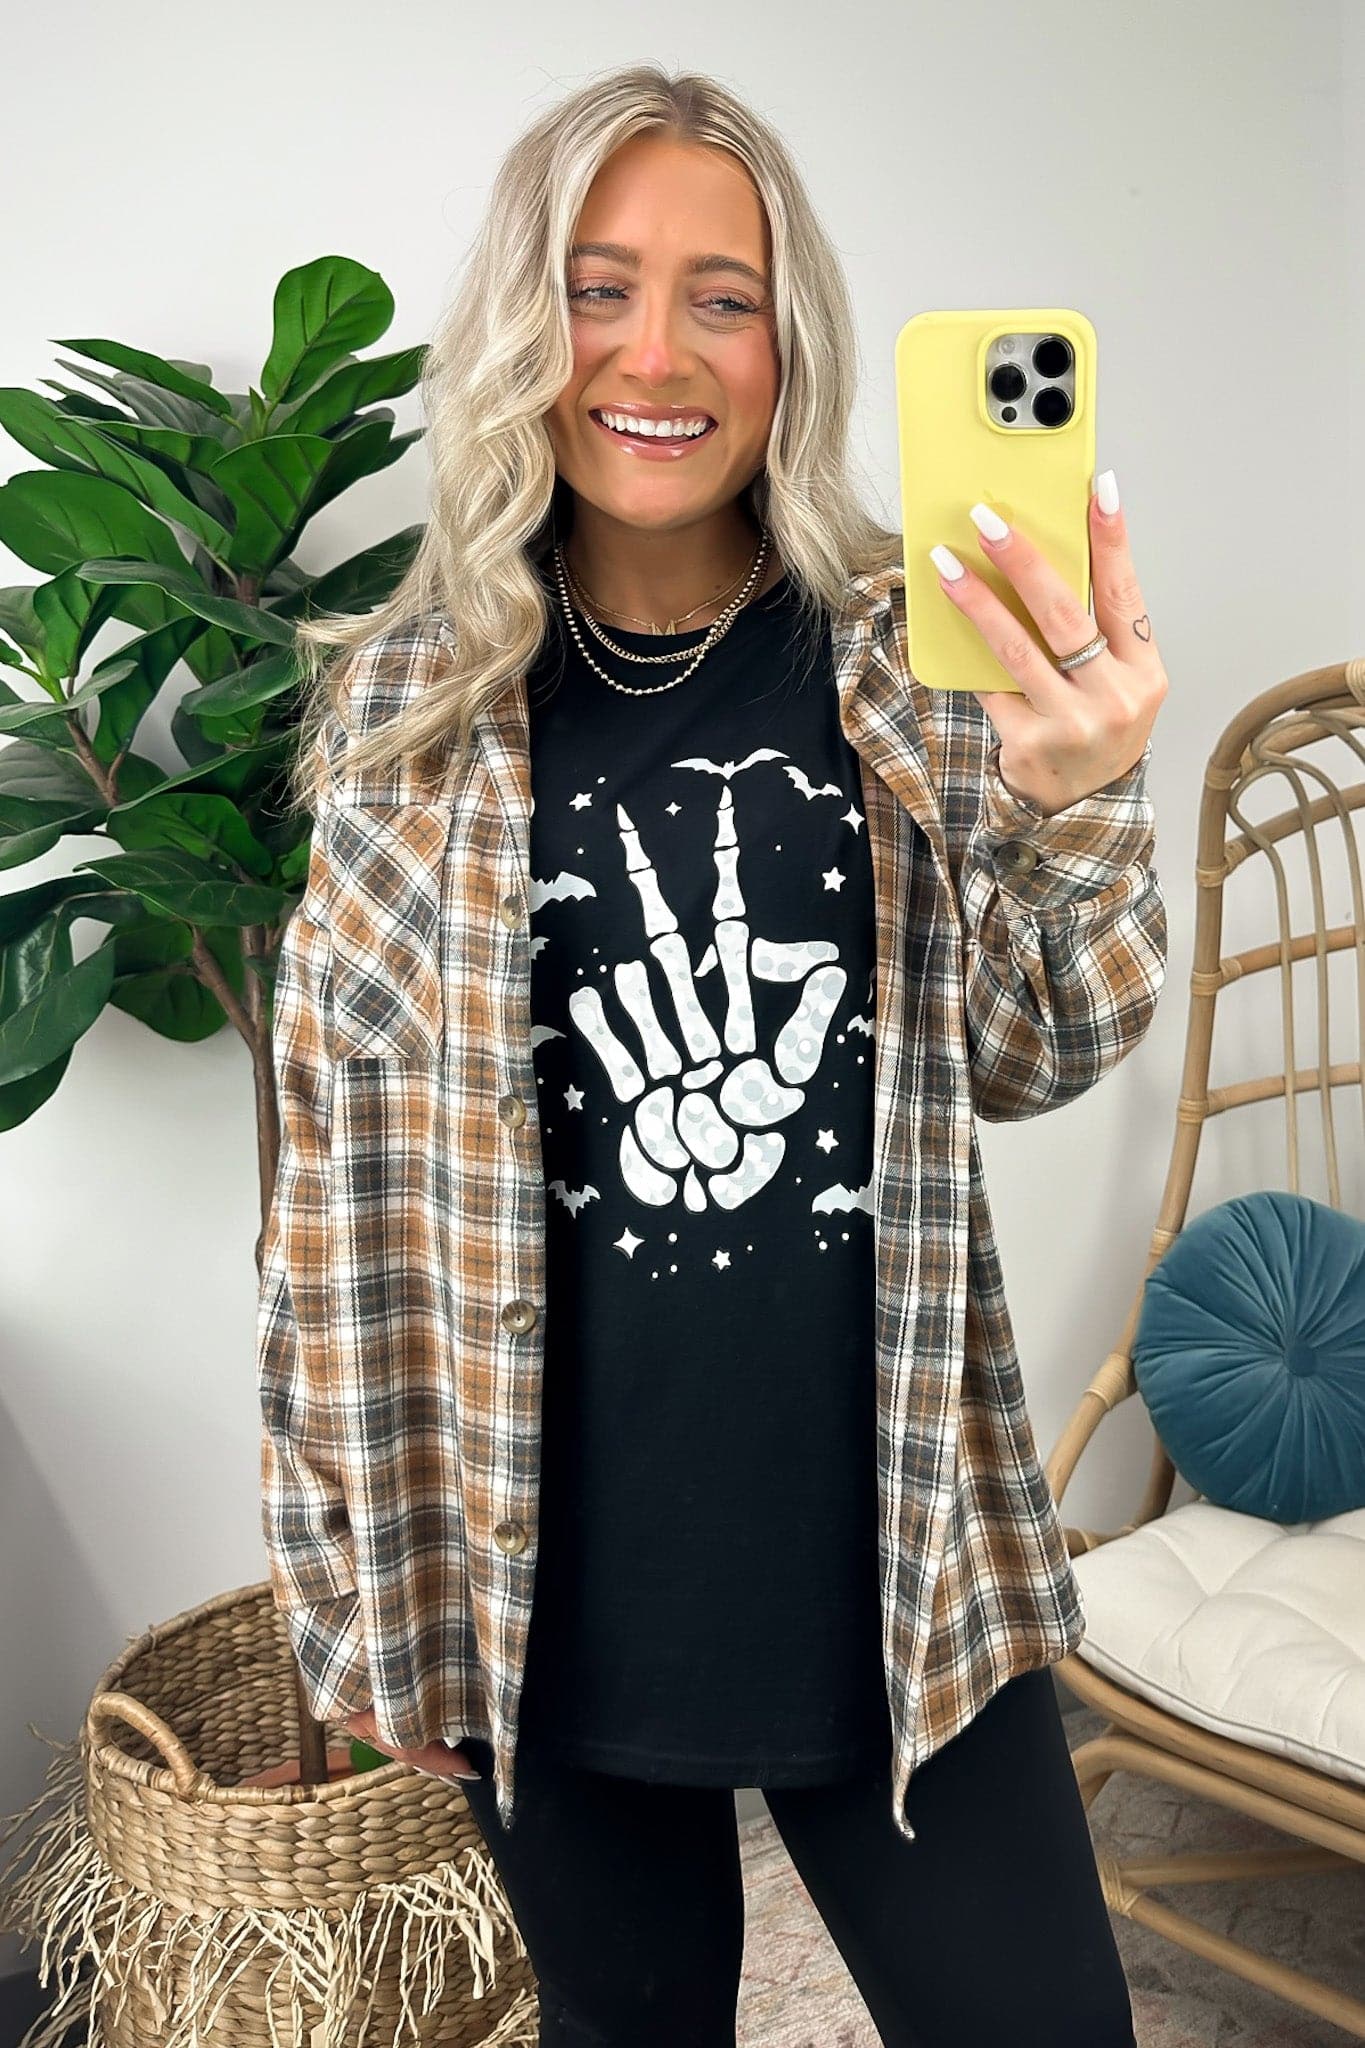  Peace Skeleton Hand Graphic Tee - BACK IN STOCK - Madison and Mallory